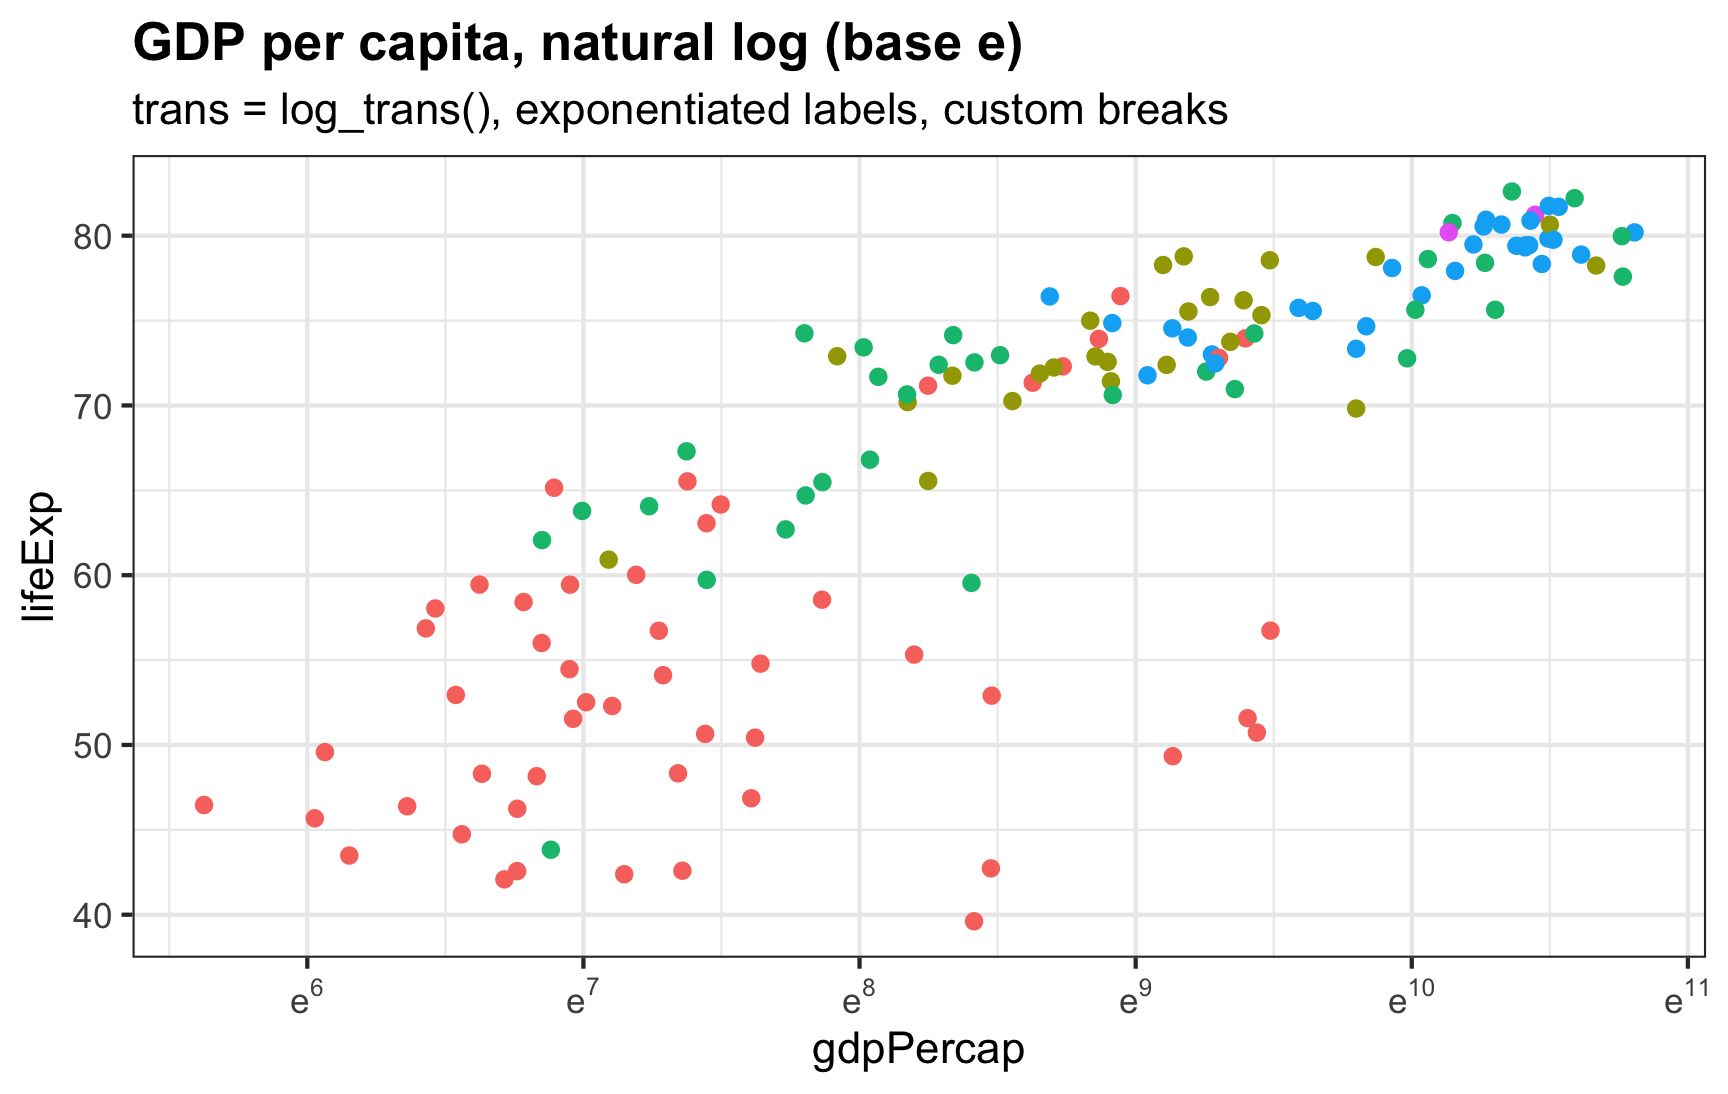 The x-axis now shows GDP per capita scaled to log base $e$, or the natural log, with axis breaks at 6, 7, 8, 9, 10, and 11. The values on the x-axis are logged automatically with `trans = log_trans()`.